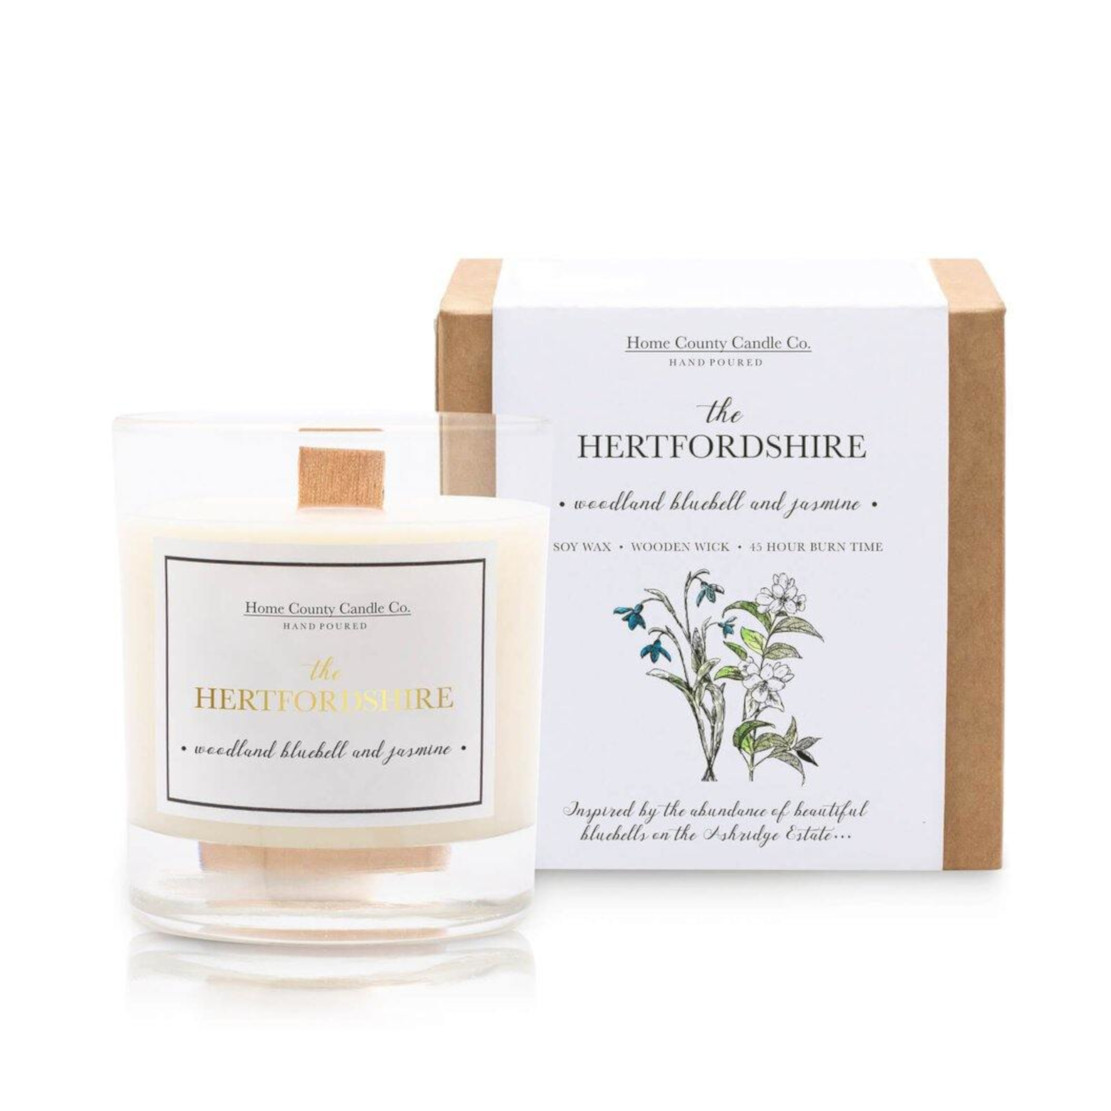 Home County Candle Hertfordshire 200g Soy Candle